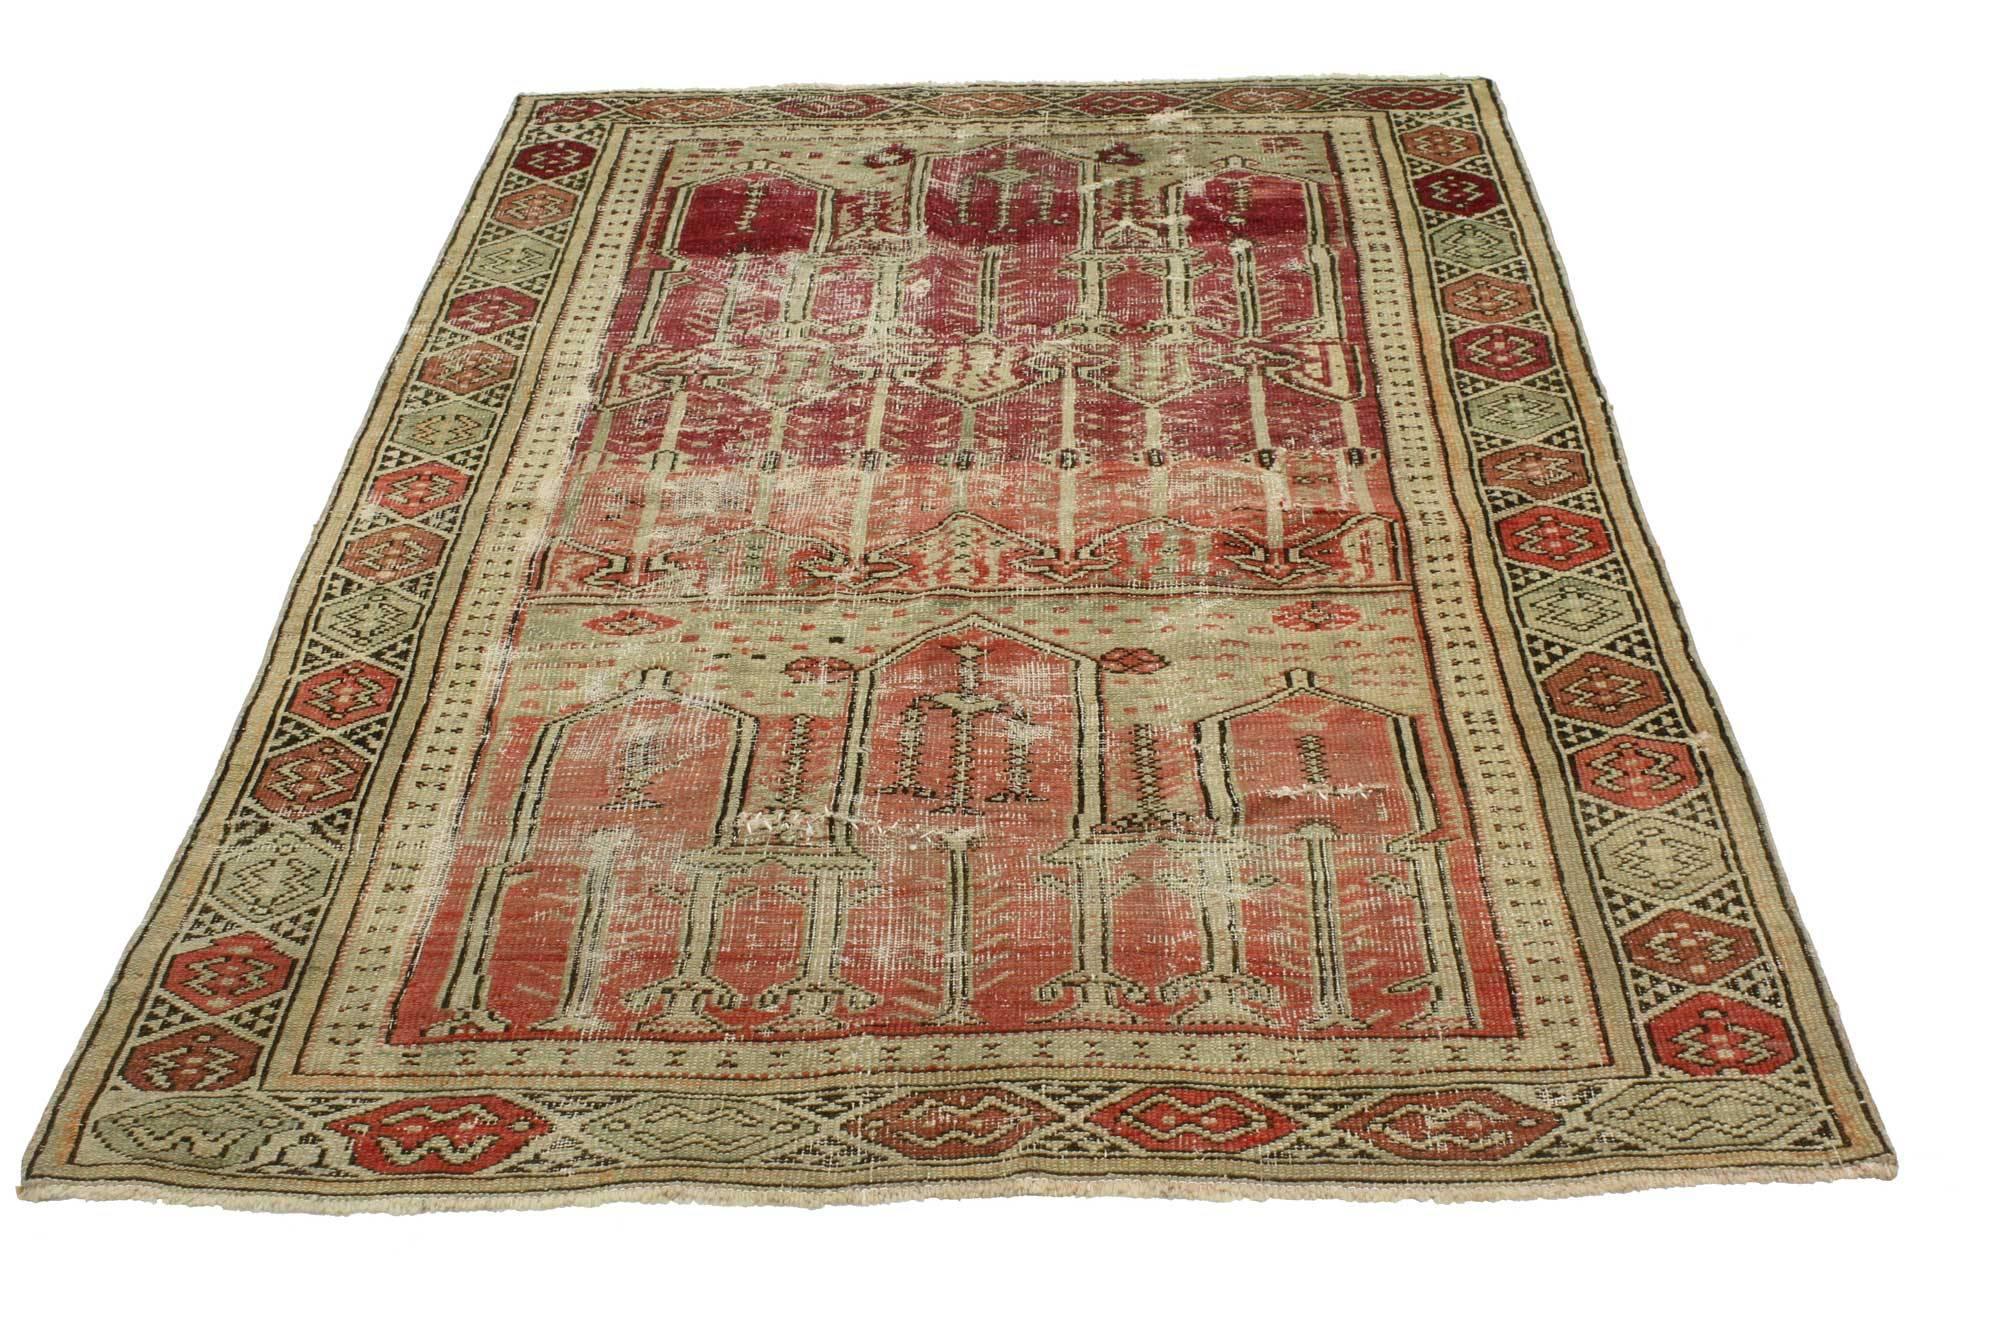 51690 distressed vintage Turkish Oushak rug with rustic style. Mysterious and atmospheric with Bohemian allure, this distressed vintage Turkish Oushak rug enchants us with its Gothic forms and earthy, sober color way. With desirable wear adding